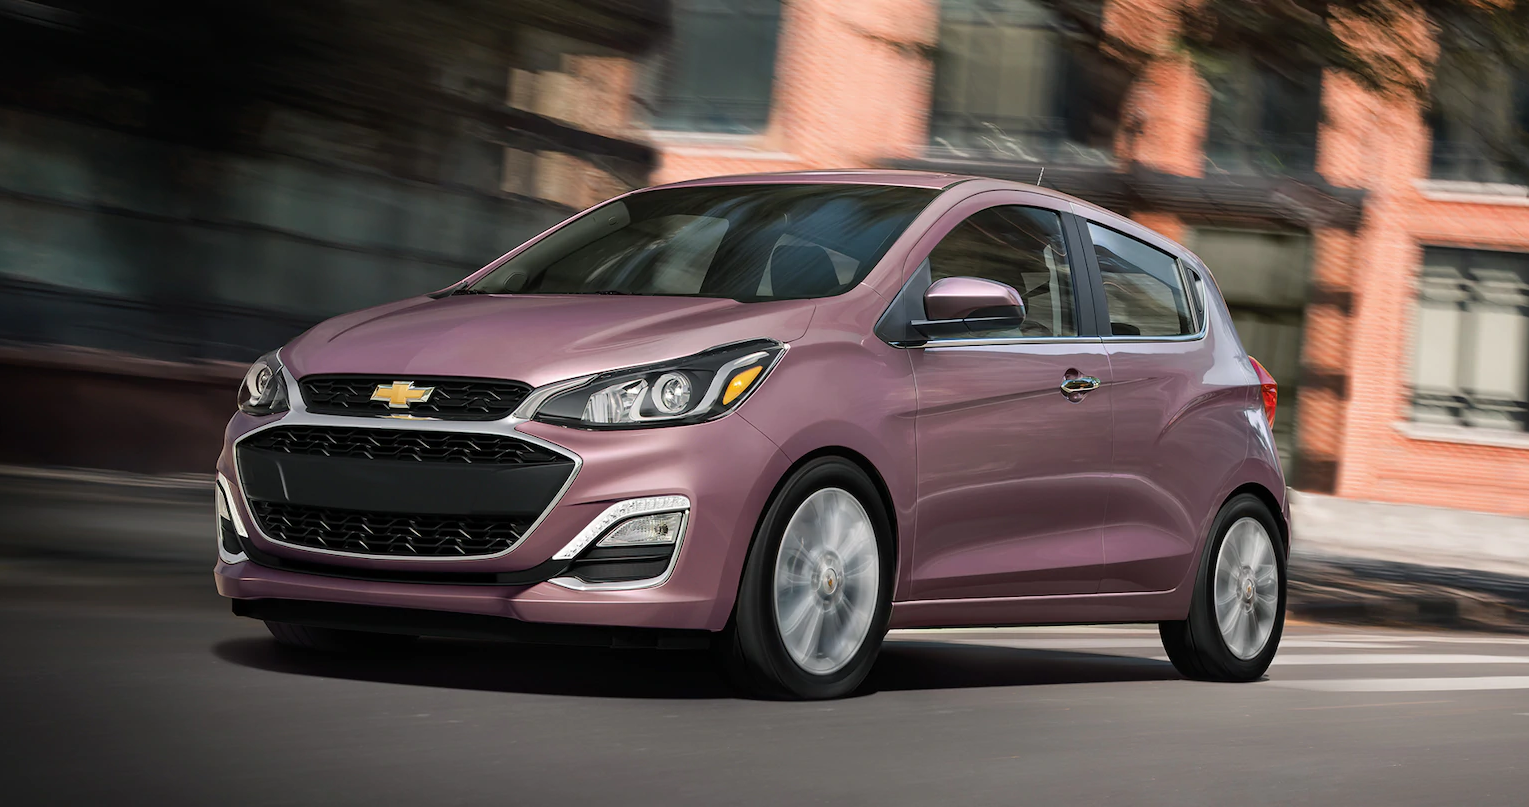 2019 Chevrolet Spark Overview - The News Wheel